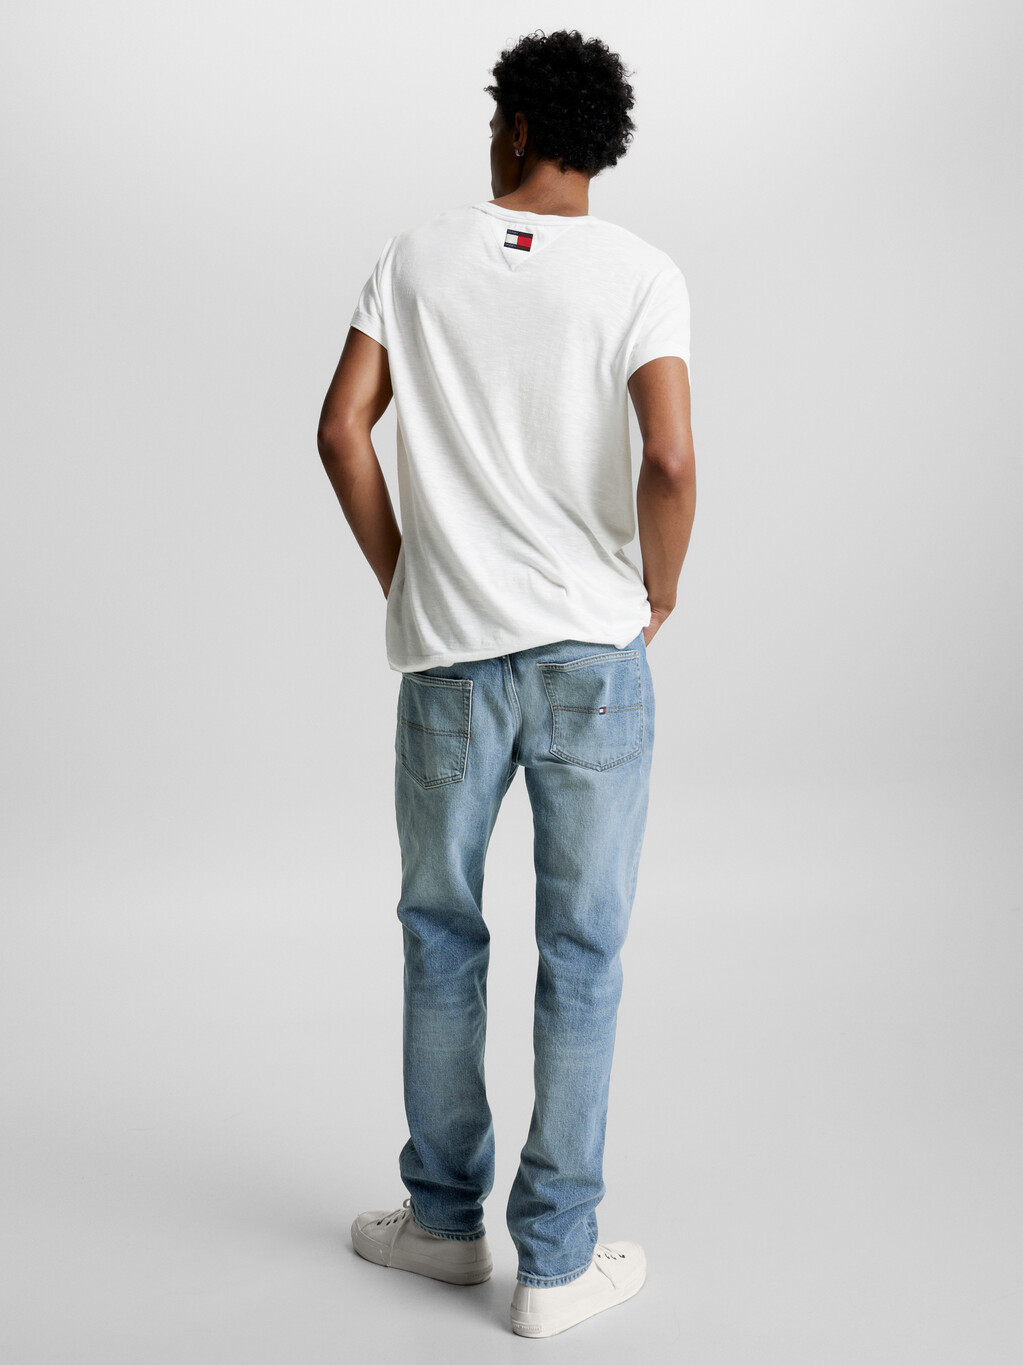 Tommy Hilfiger X Shawn Mendes T 裇, Th Optic White, hi-res